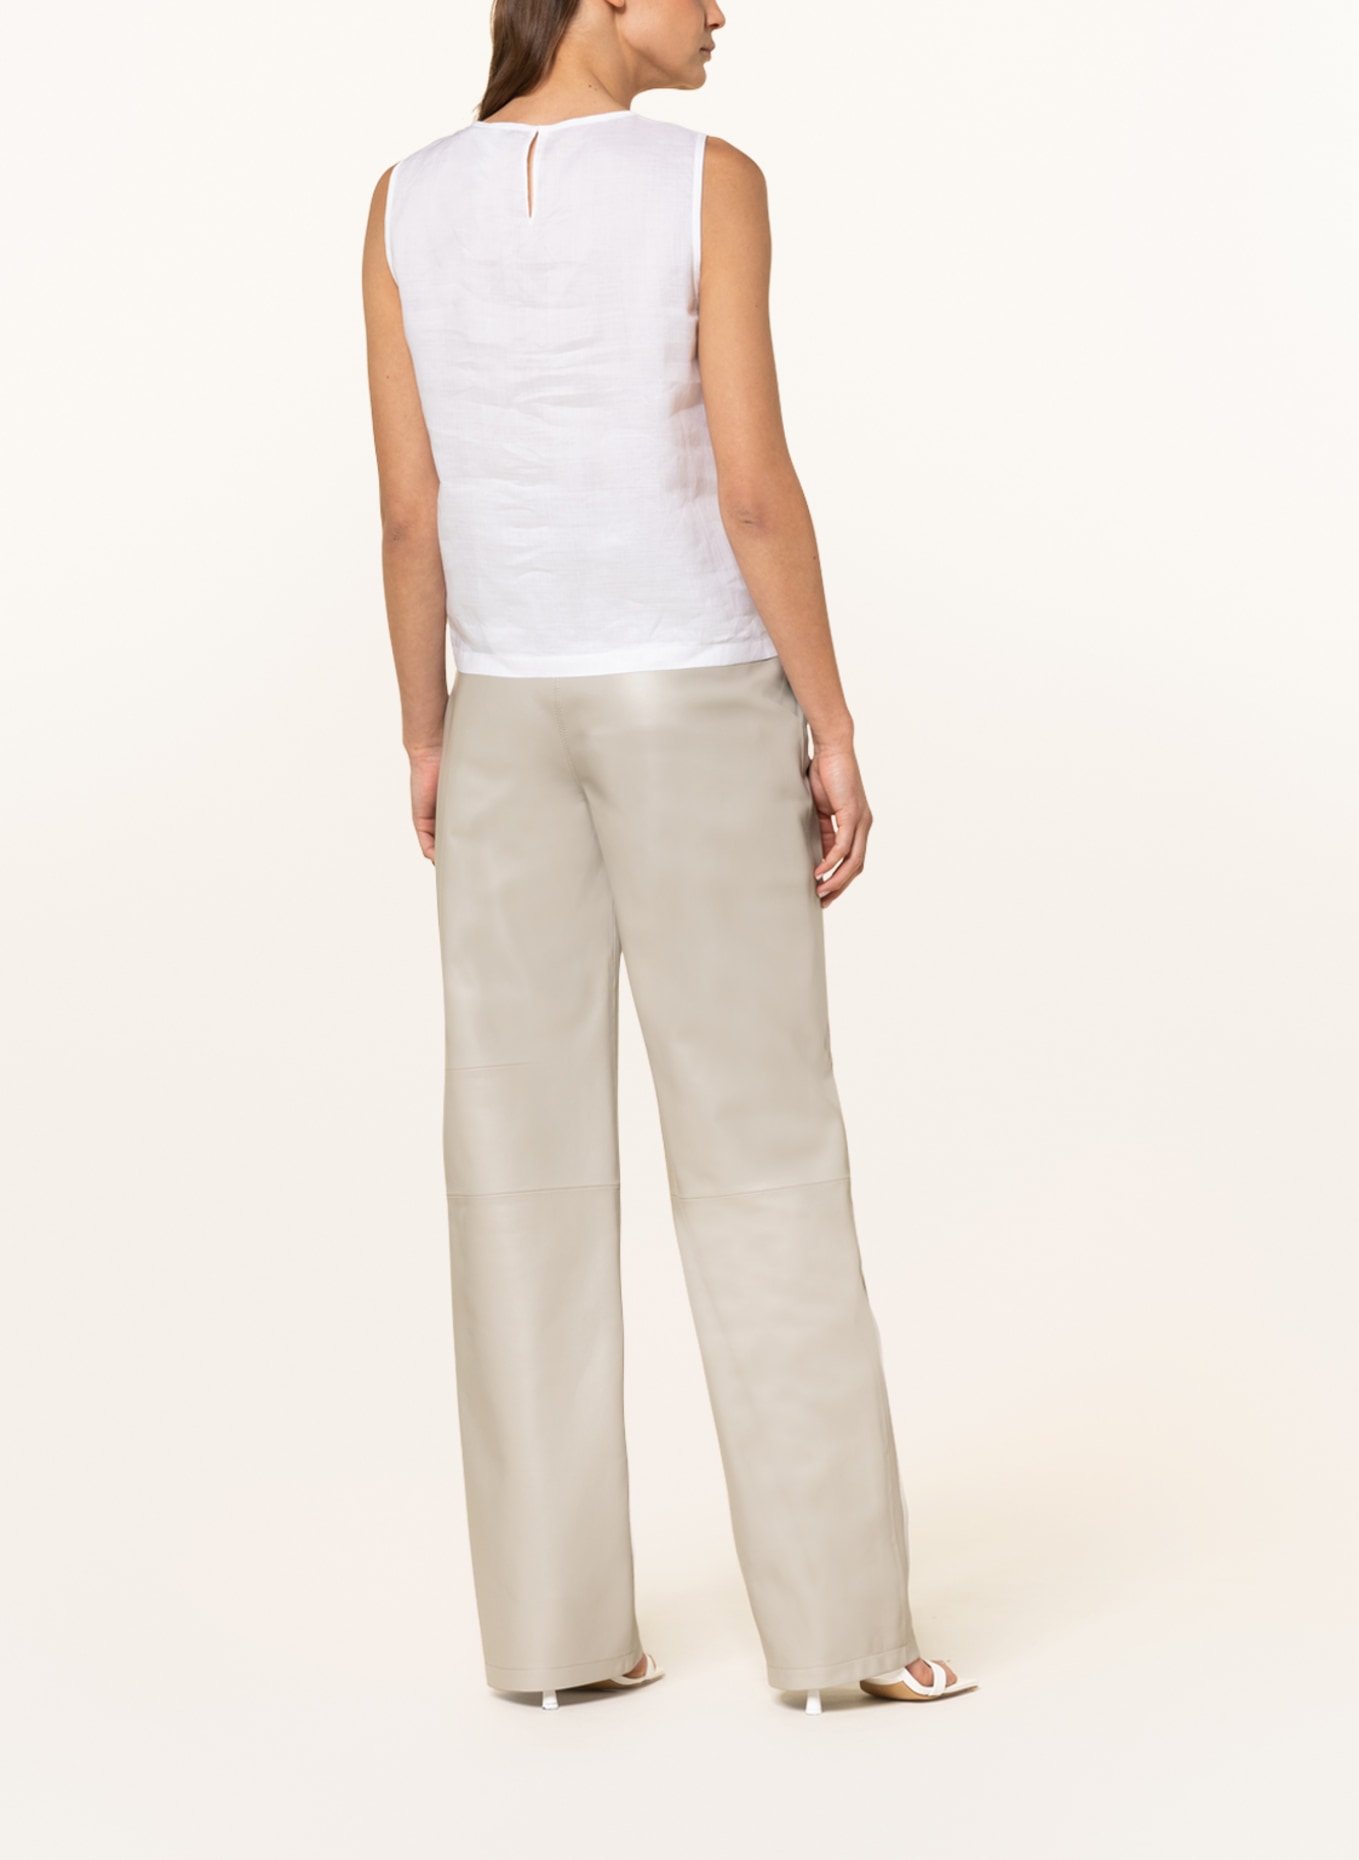 MaxMara STUDIO Blouse top GIOSTRA with broderie anglaise, Color: WHITE (Image 3)